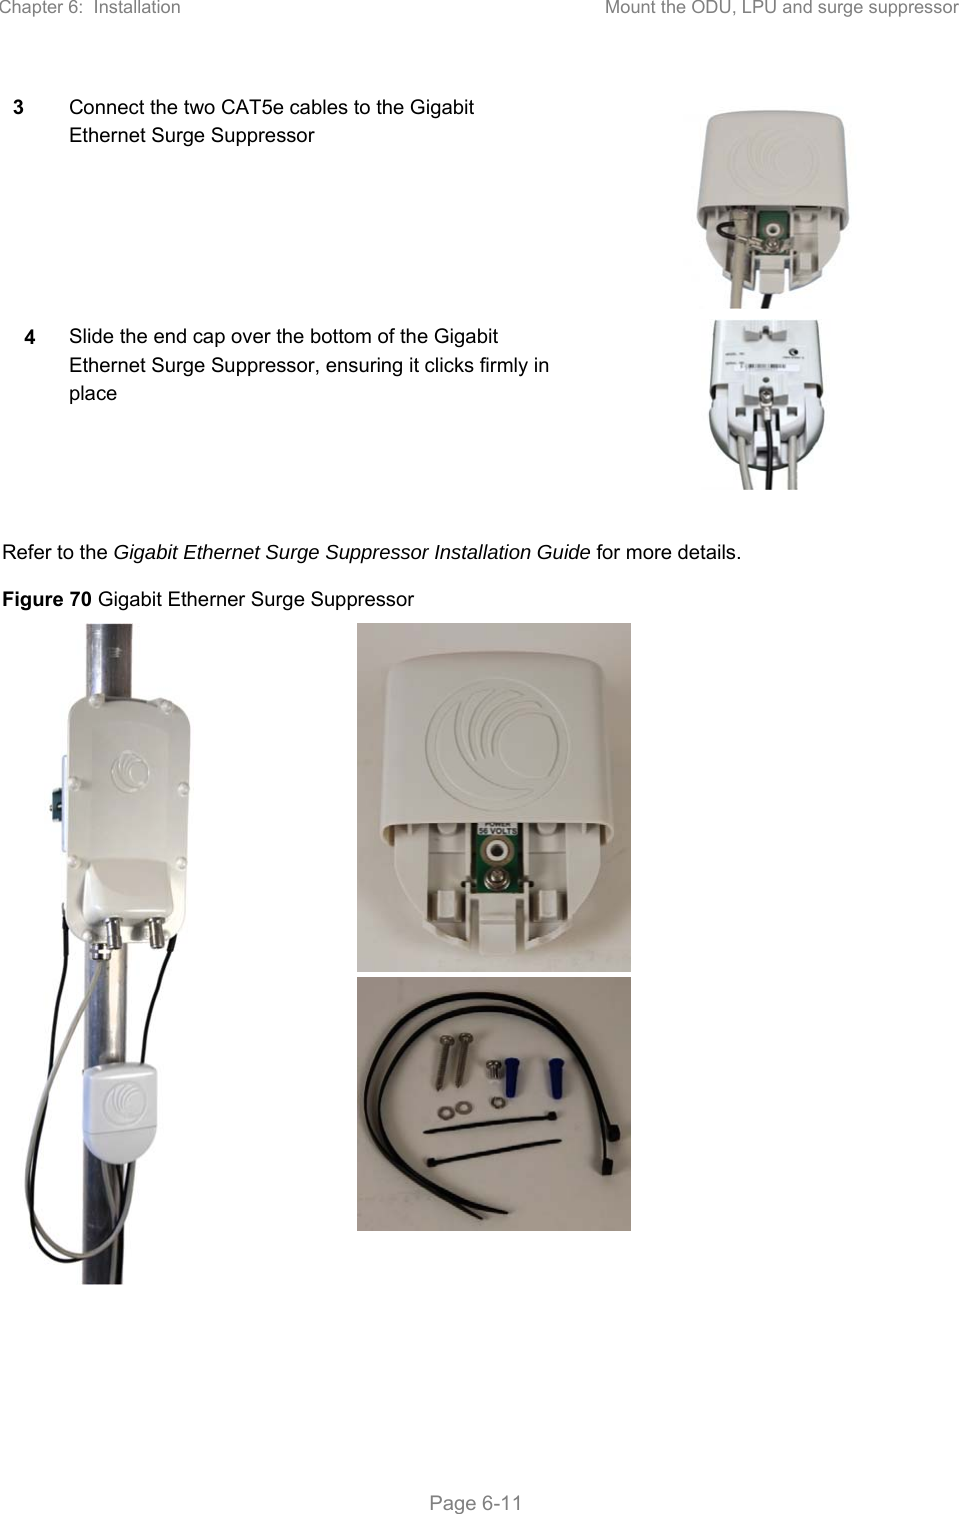 Chapter 6:  Installation  Mount the ODU, LPU and surge suppressor   Page 6-11 3 Connect the two CAT5e cables to the Gigabit Ethernet Surge Suppressor  4 Slide the end cap over the bottom of the Gigabit Ethernet Surge Suppressor, ensuring it clicks firmly in place   Refer to the Gigabit Ethernet Surge Suppressor Installation Guide for more details. Figure 70 Gigabit Etherner Surge Suppressor      